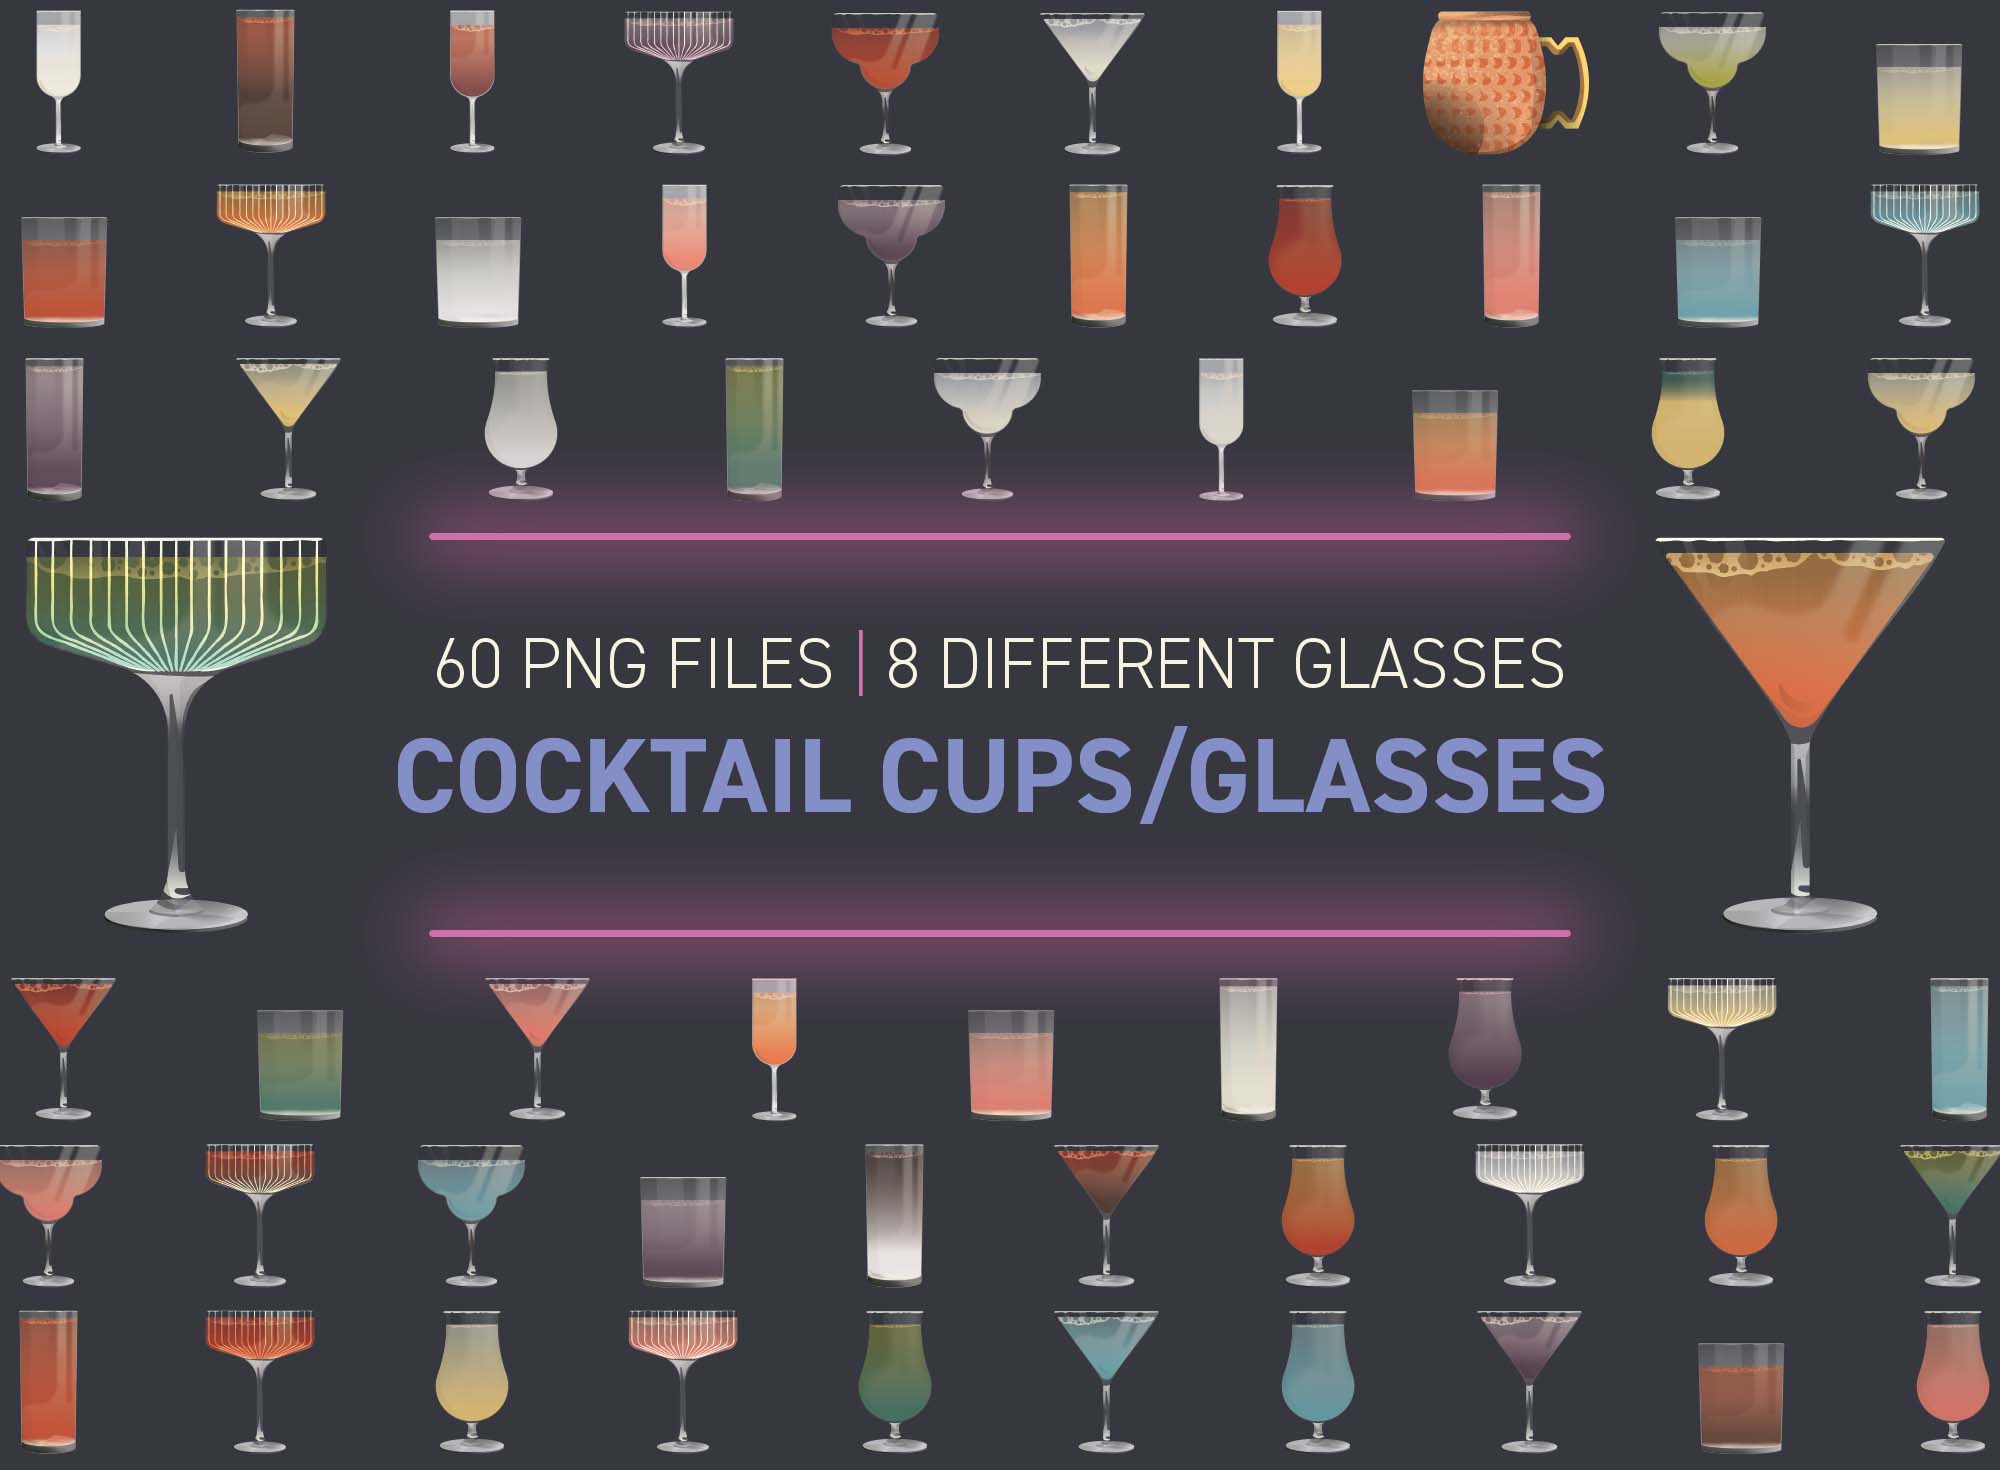 Create-Your-Own-Cocktails-PNG-listing-lelinhtdigitals_Cocktail-glasses-cups-clip-arts